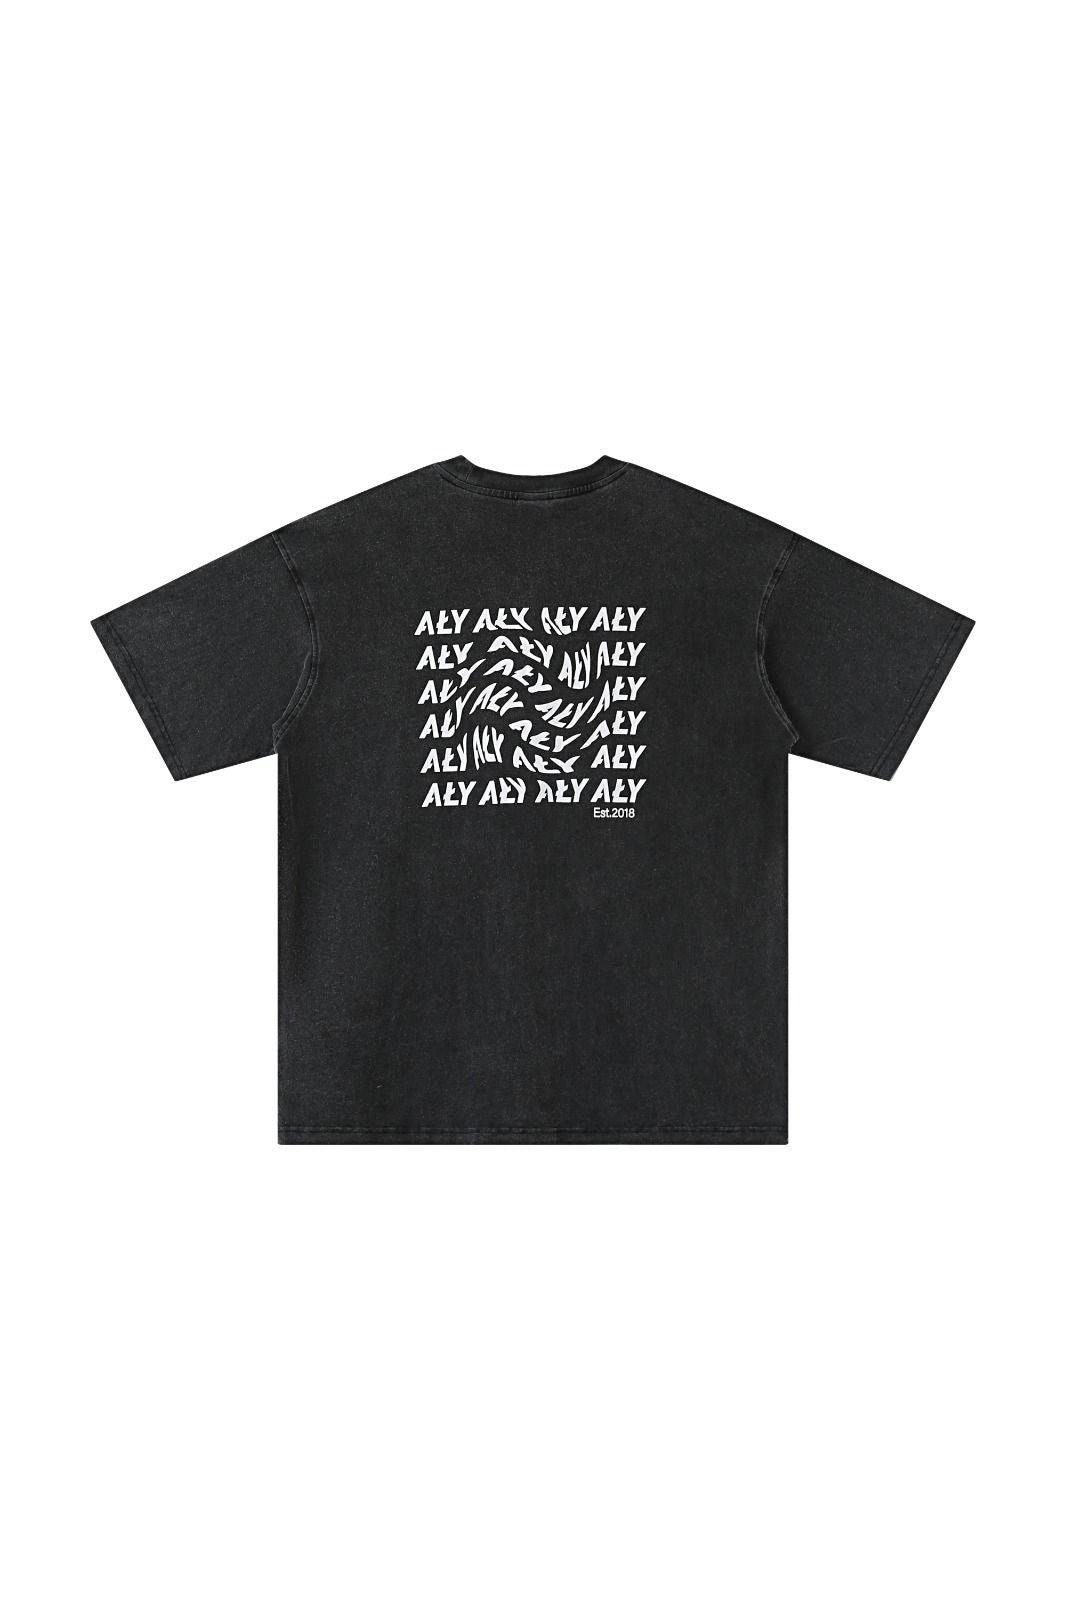 Aly Good Vibes - "You Decide Your Vibes" Tee (Black)